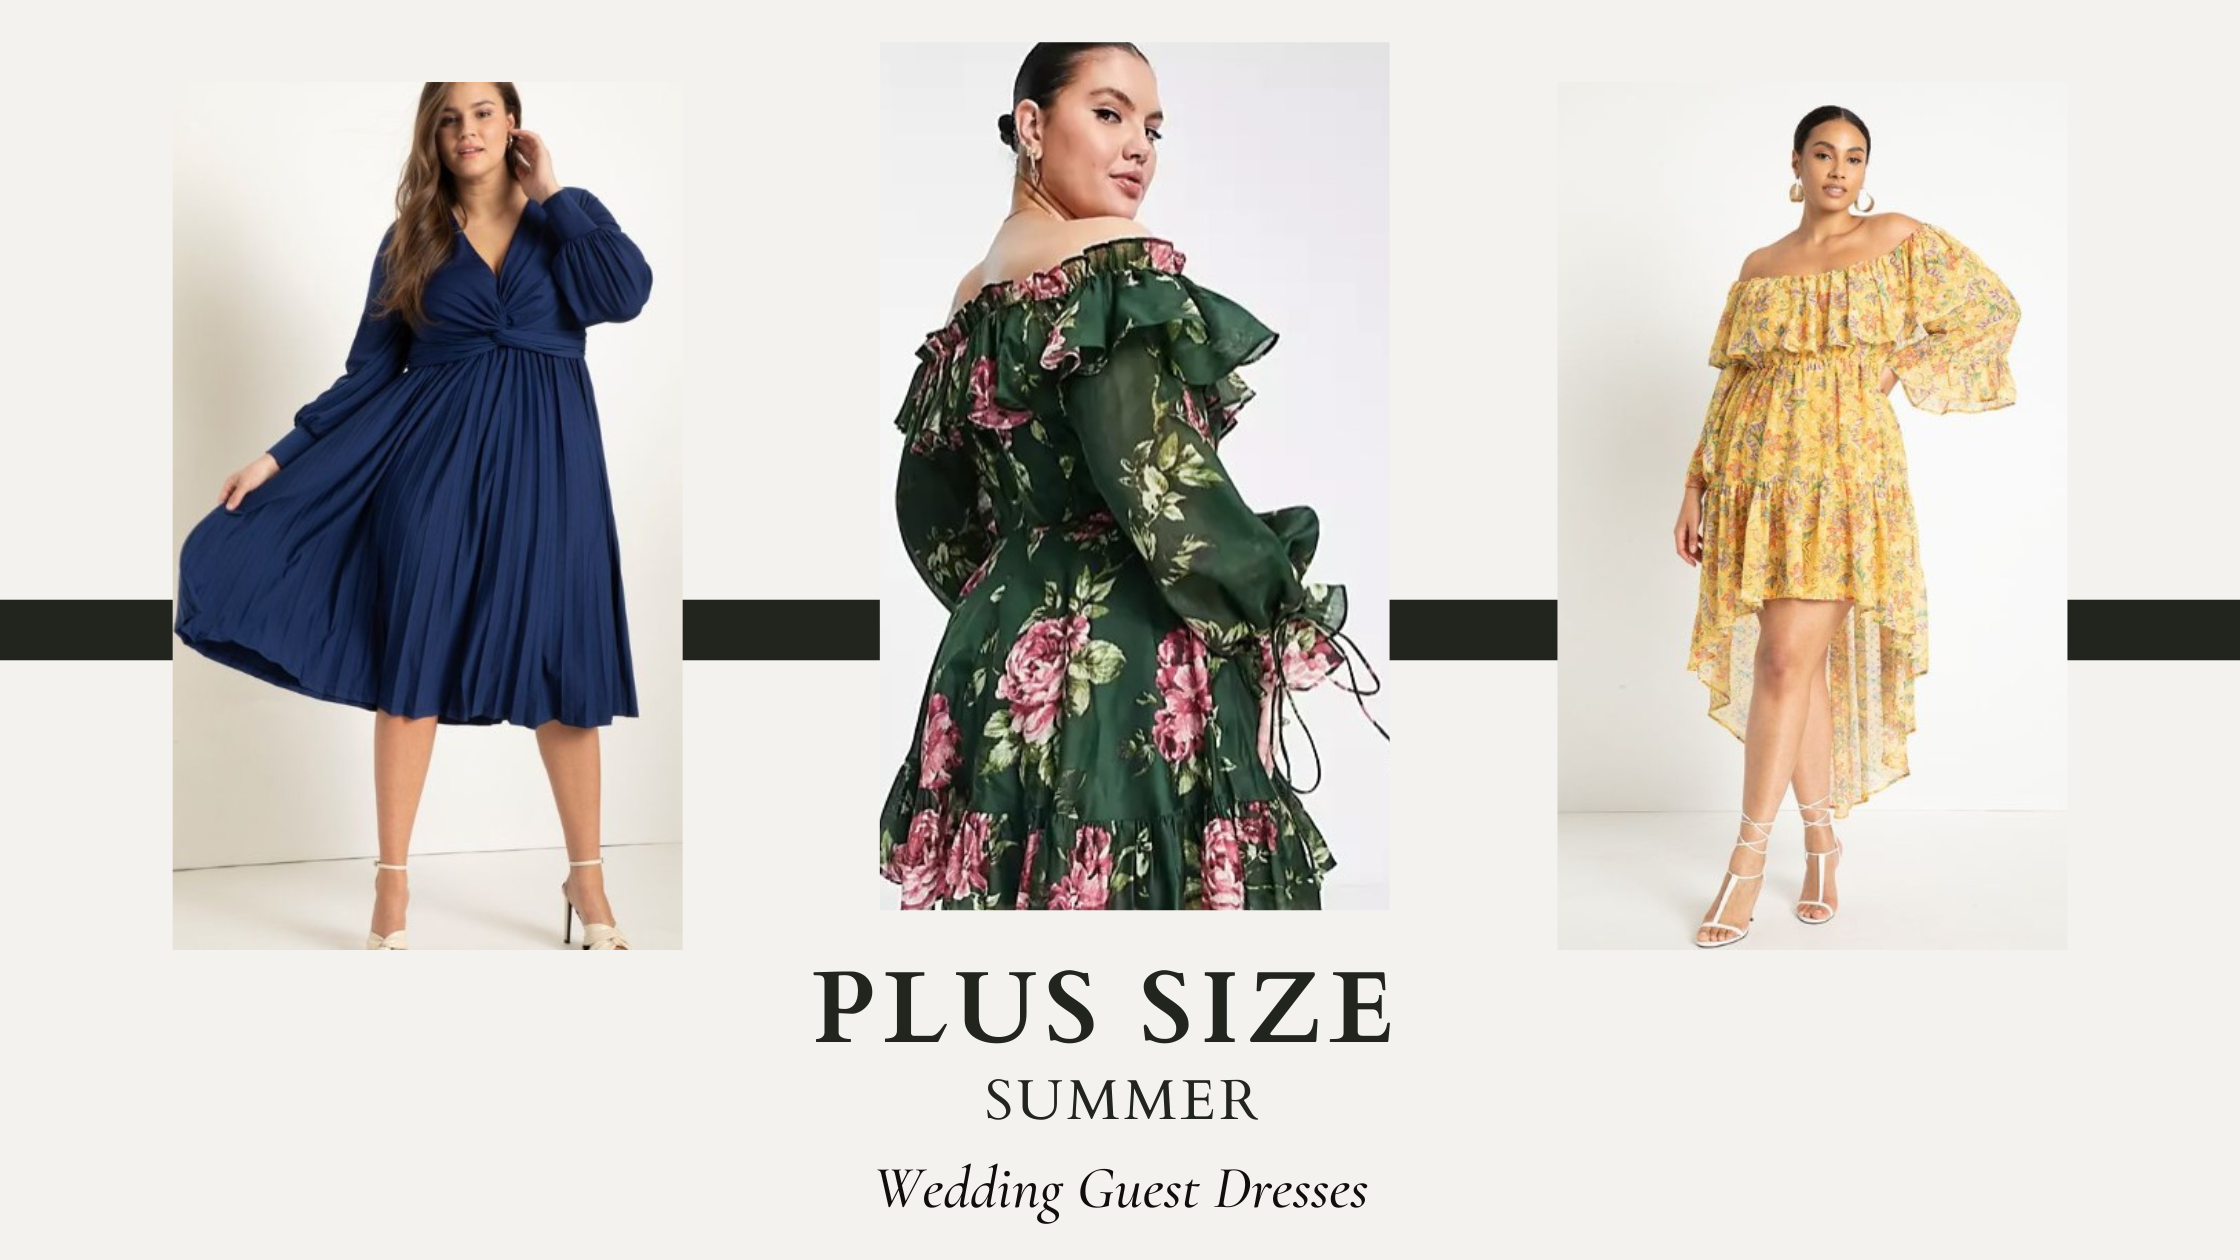 Summer Wedding Guest Dresses - The Couponest